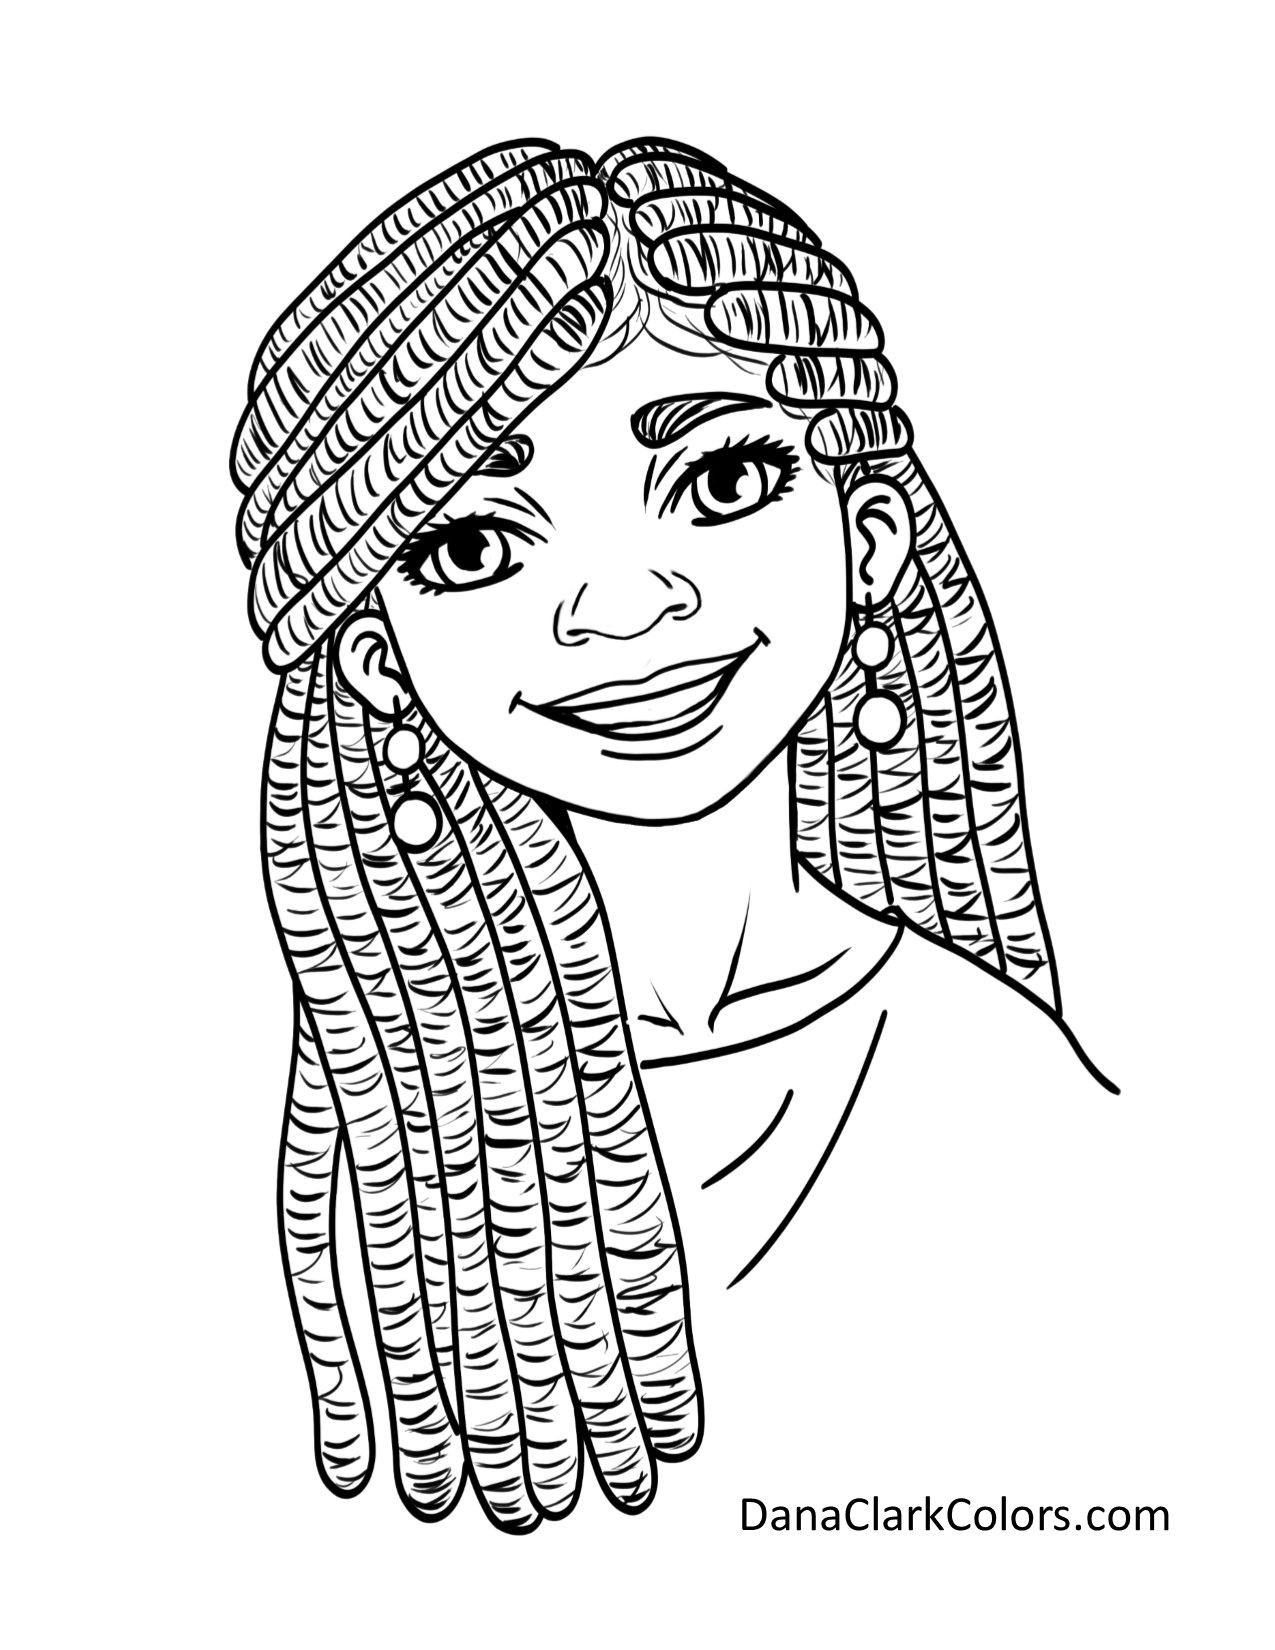 Coloring Pages Black Girls
 Black Kids coloring page AfricanAmericanColoringPage